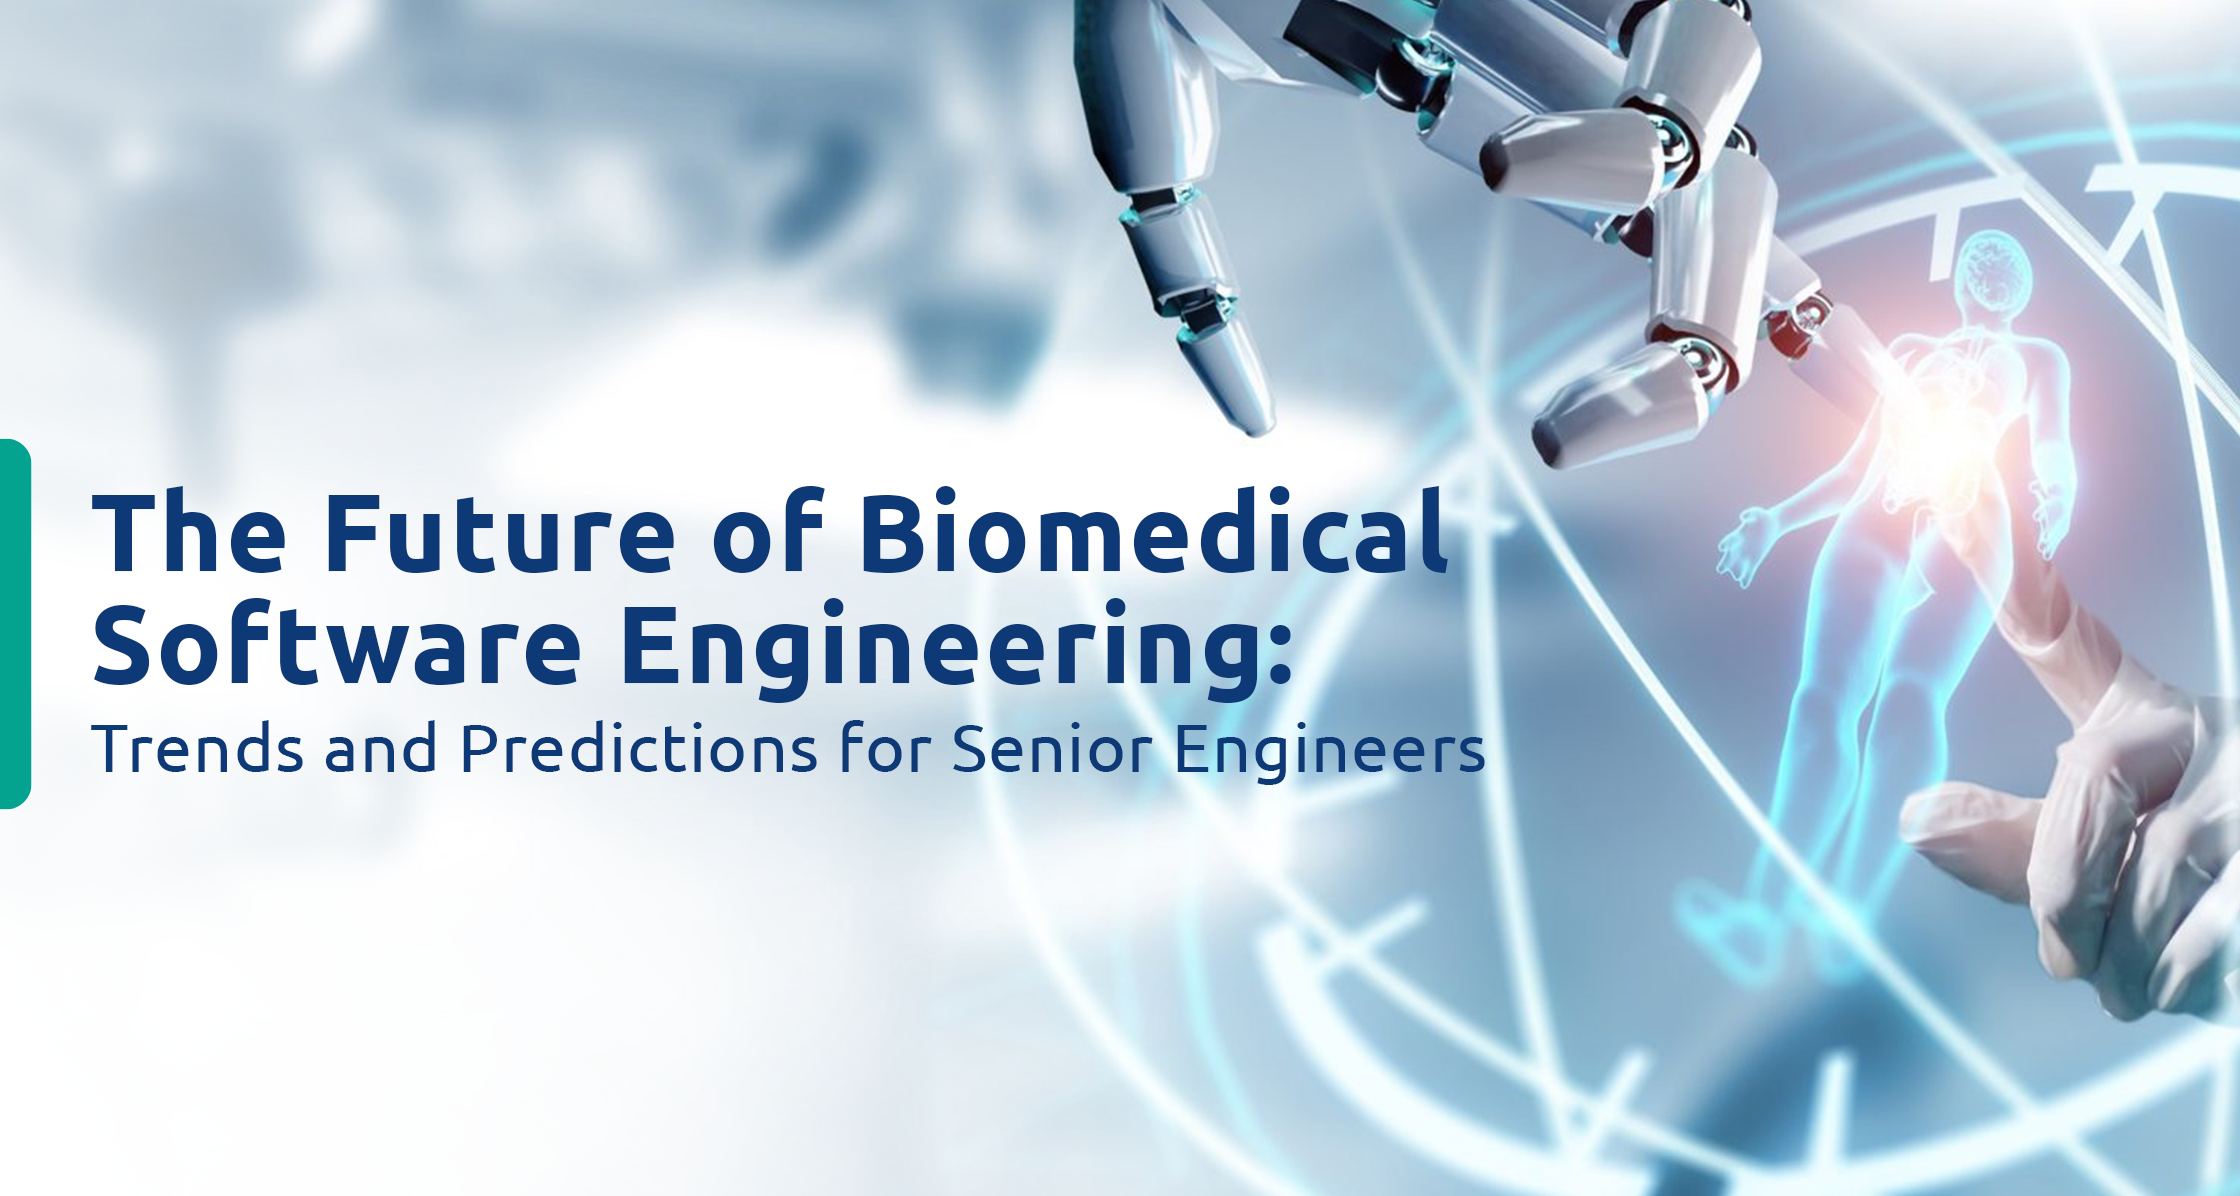 The Future of Biomedical Software Engineering: Trends and Predictions for Senior Engineers